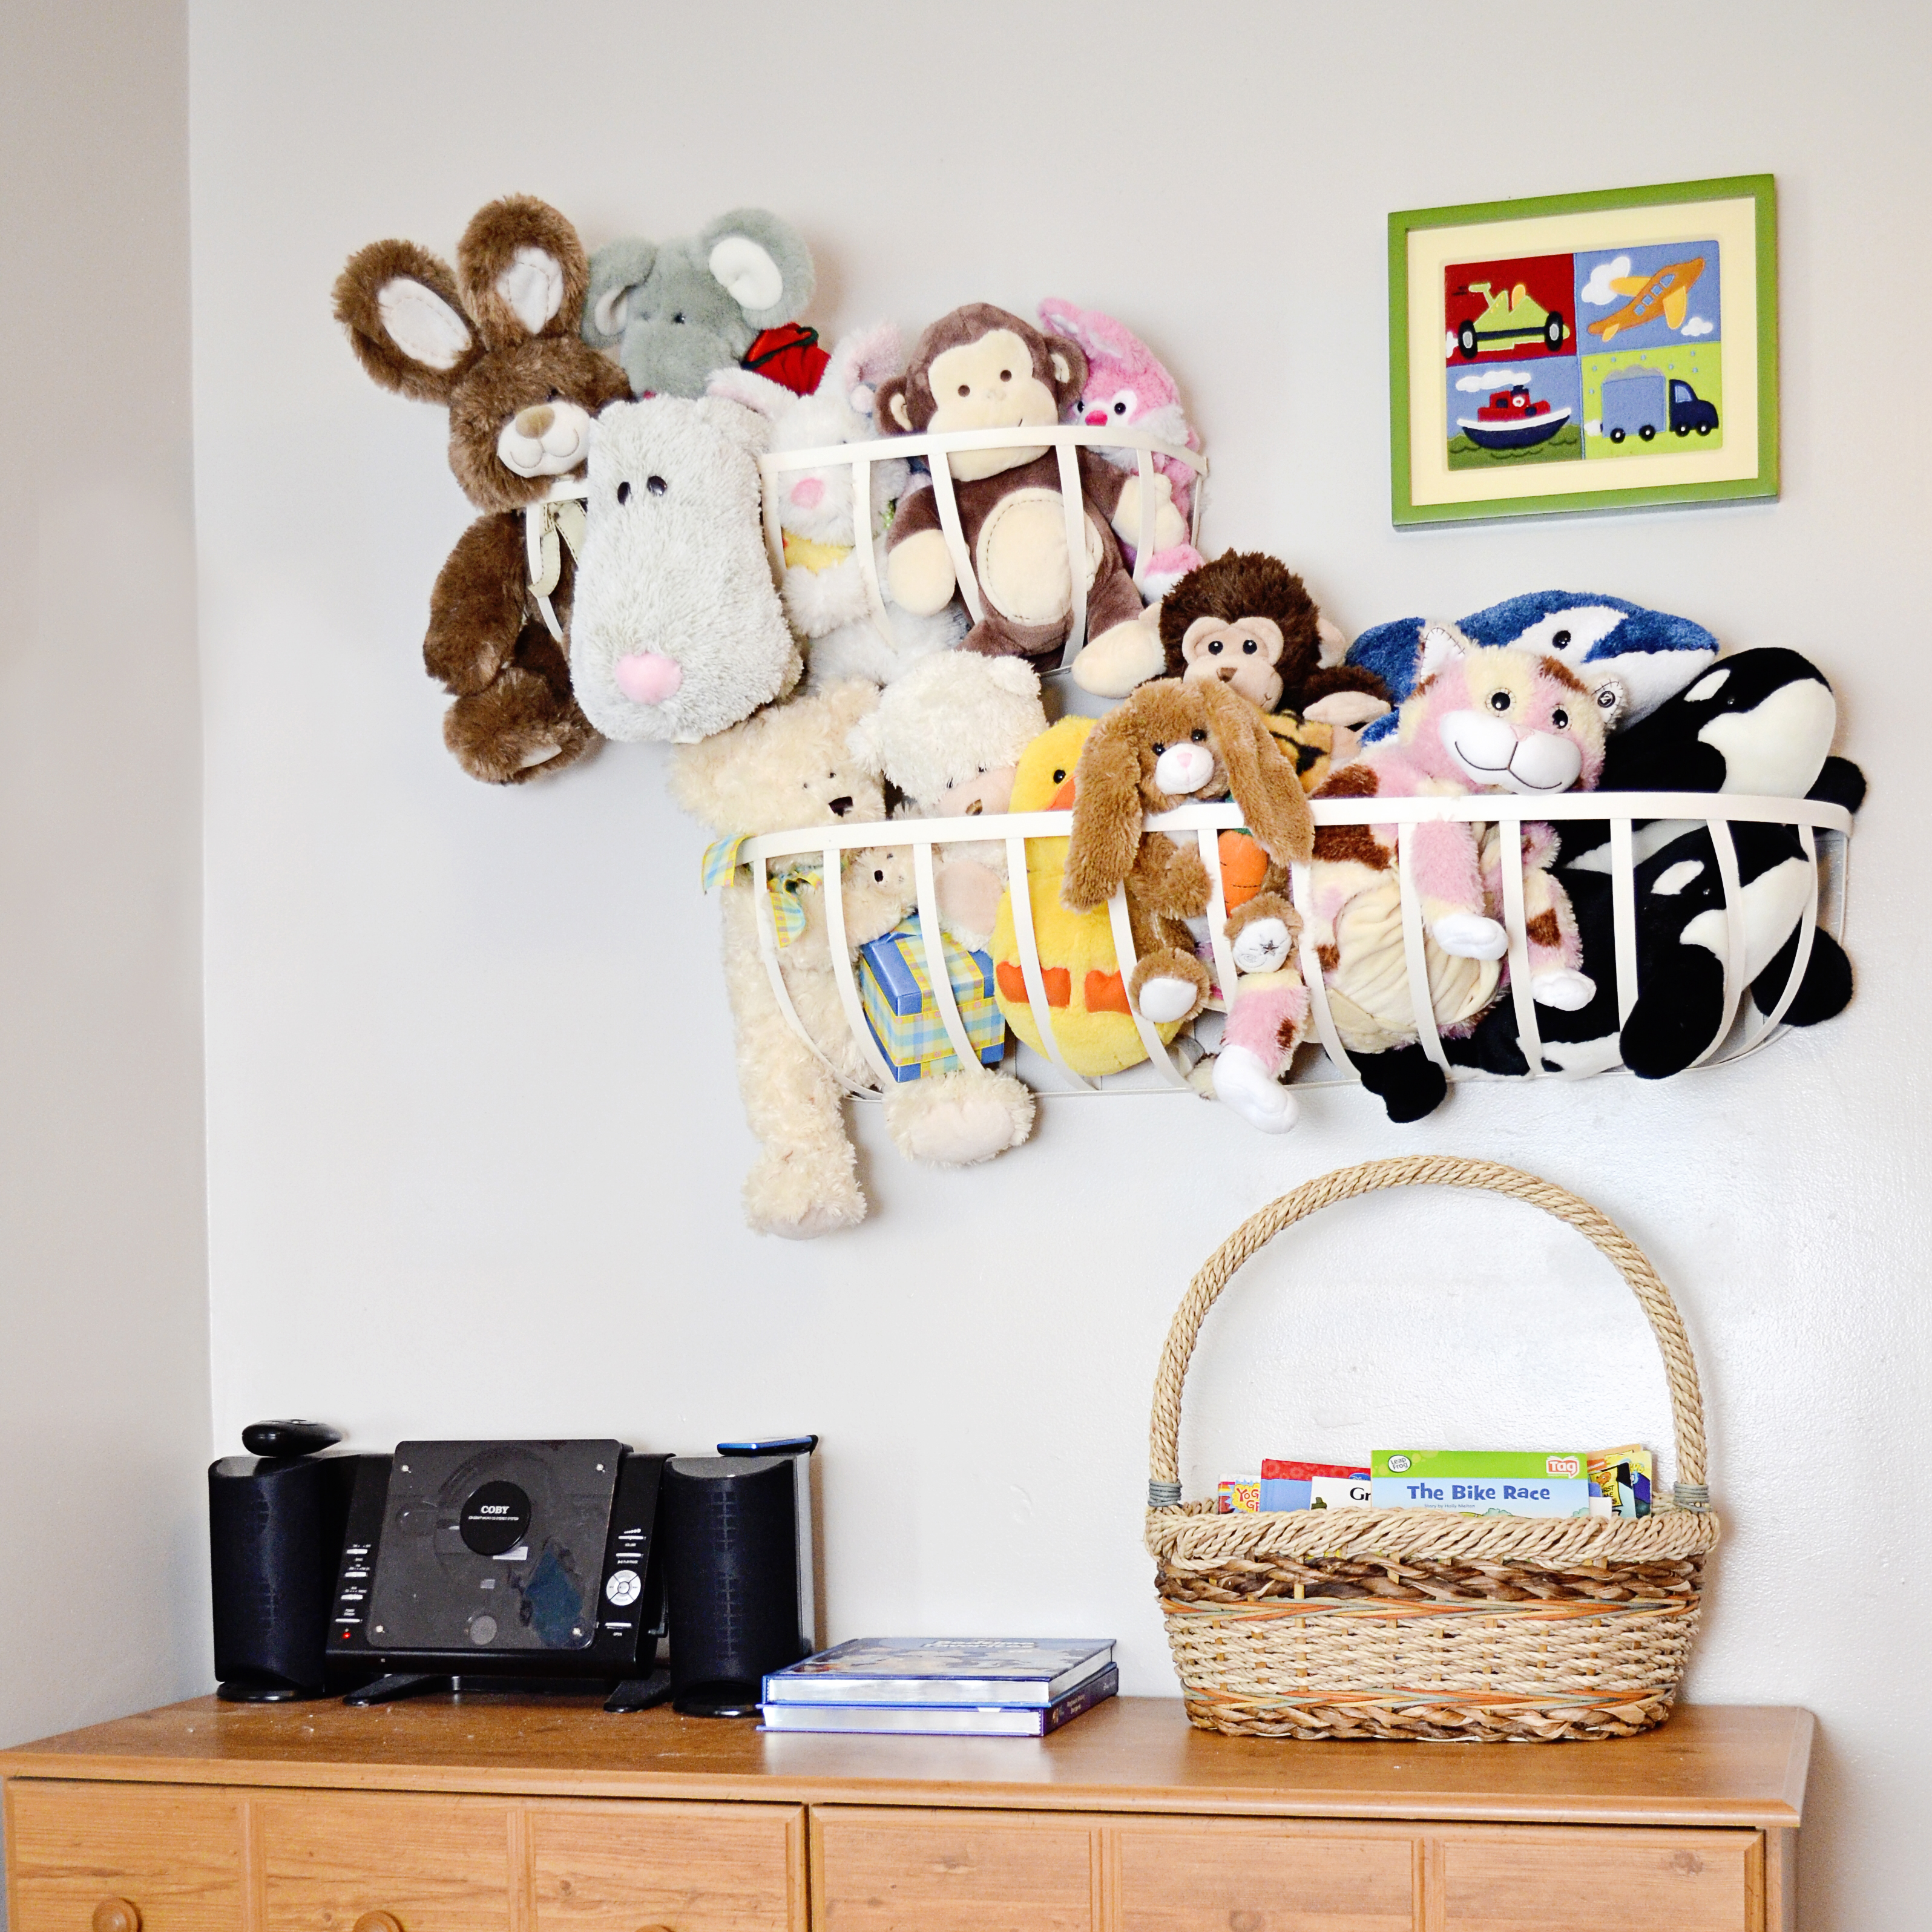 Have too many stuffed animals? Hang baskets from ceiling for a